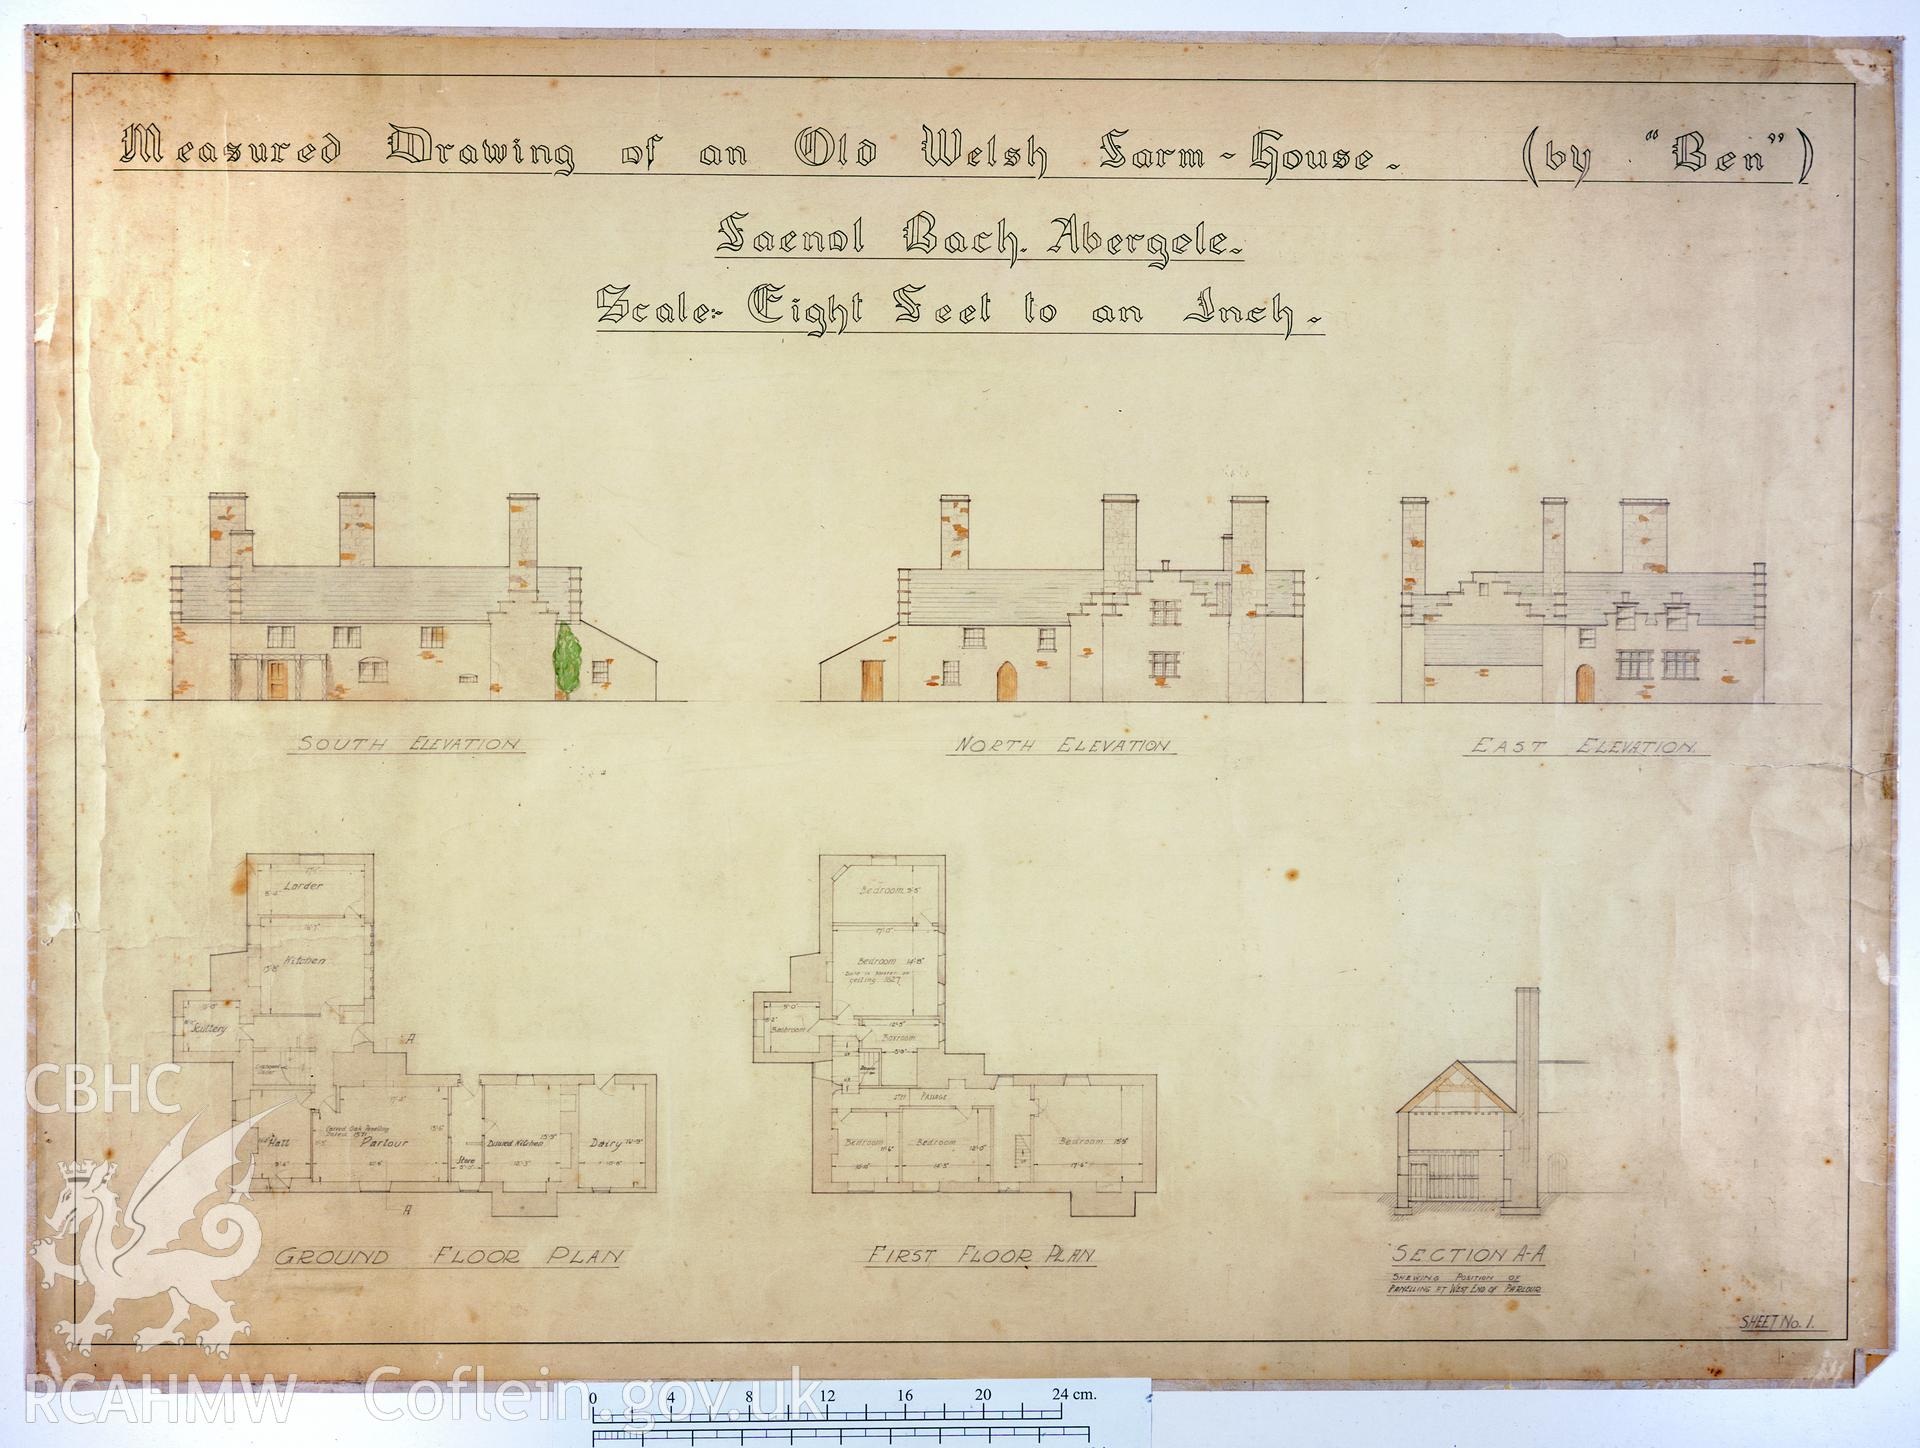 RCAHMW colour transparency showing measured drawings of Faenol Bach, Abergele.